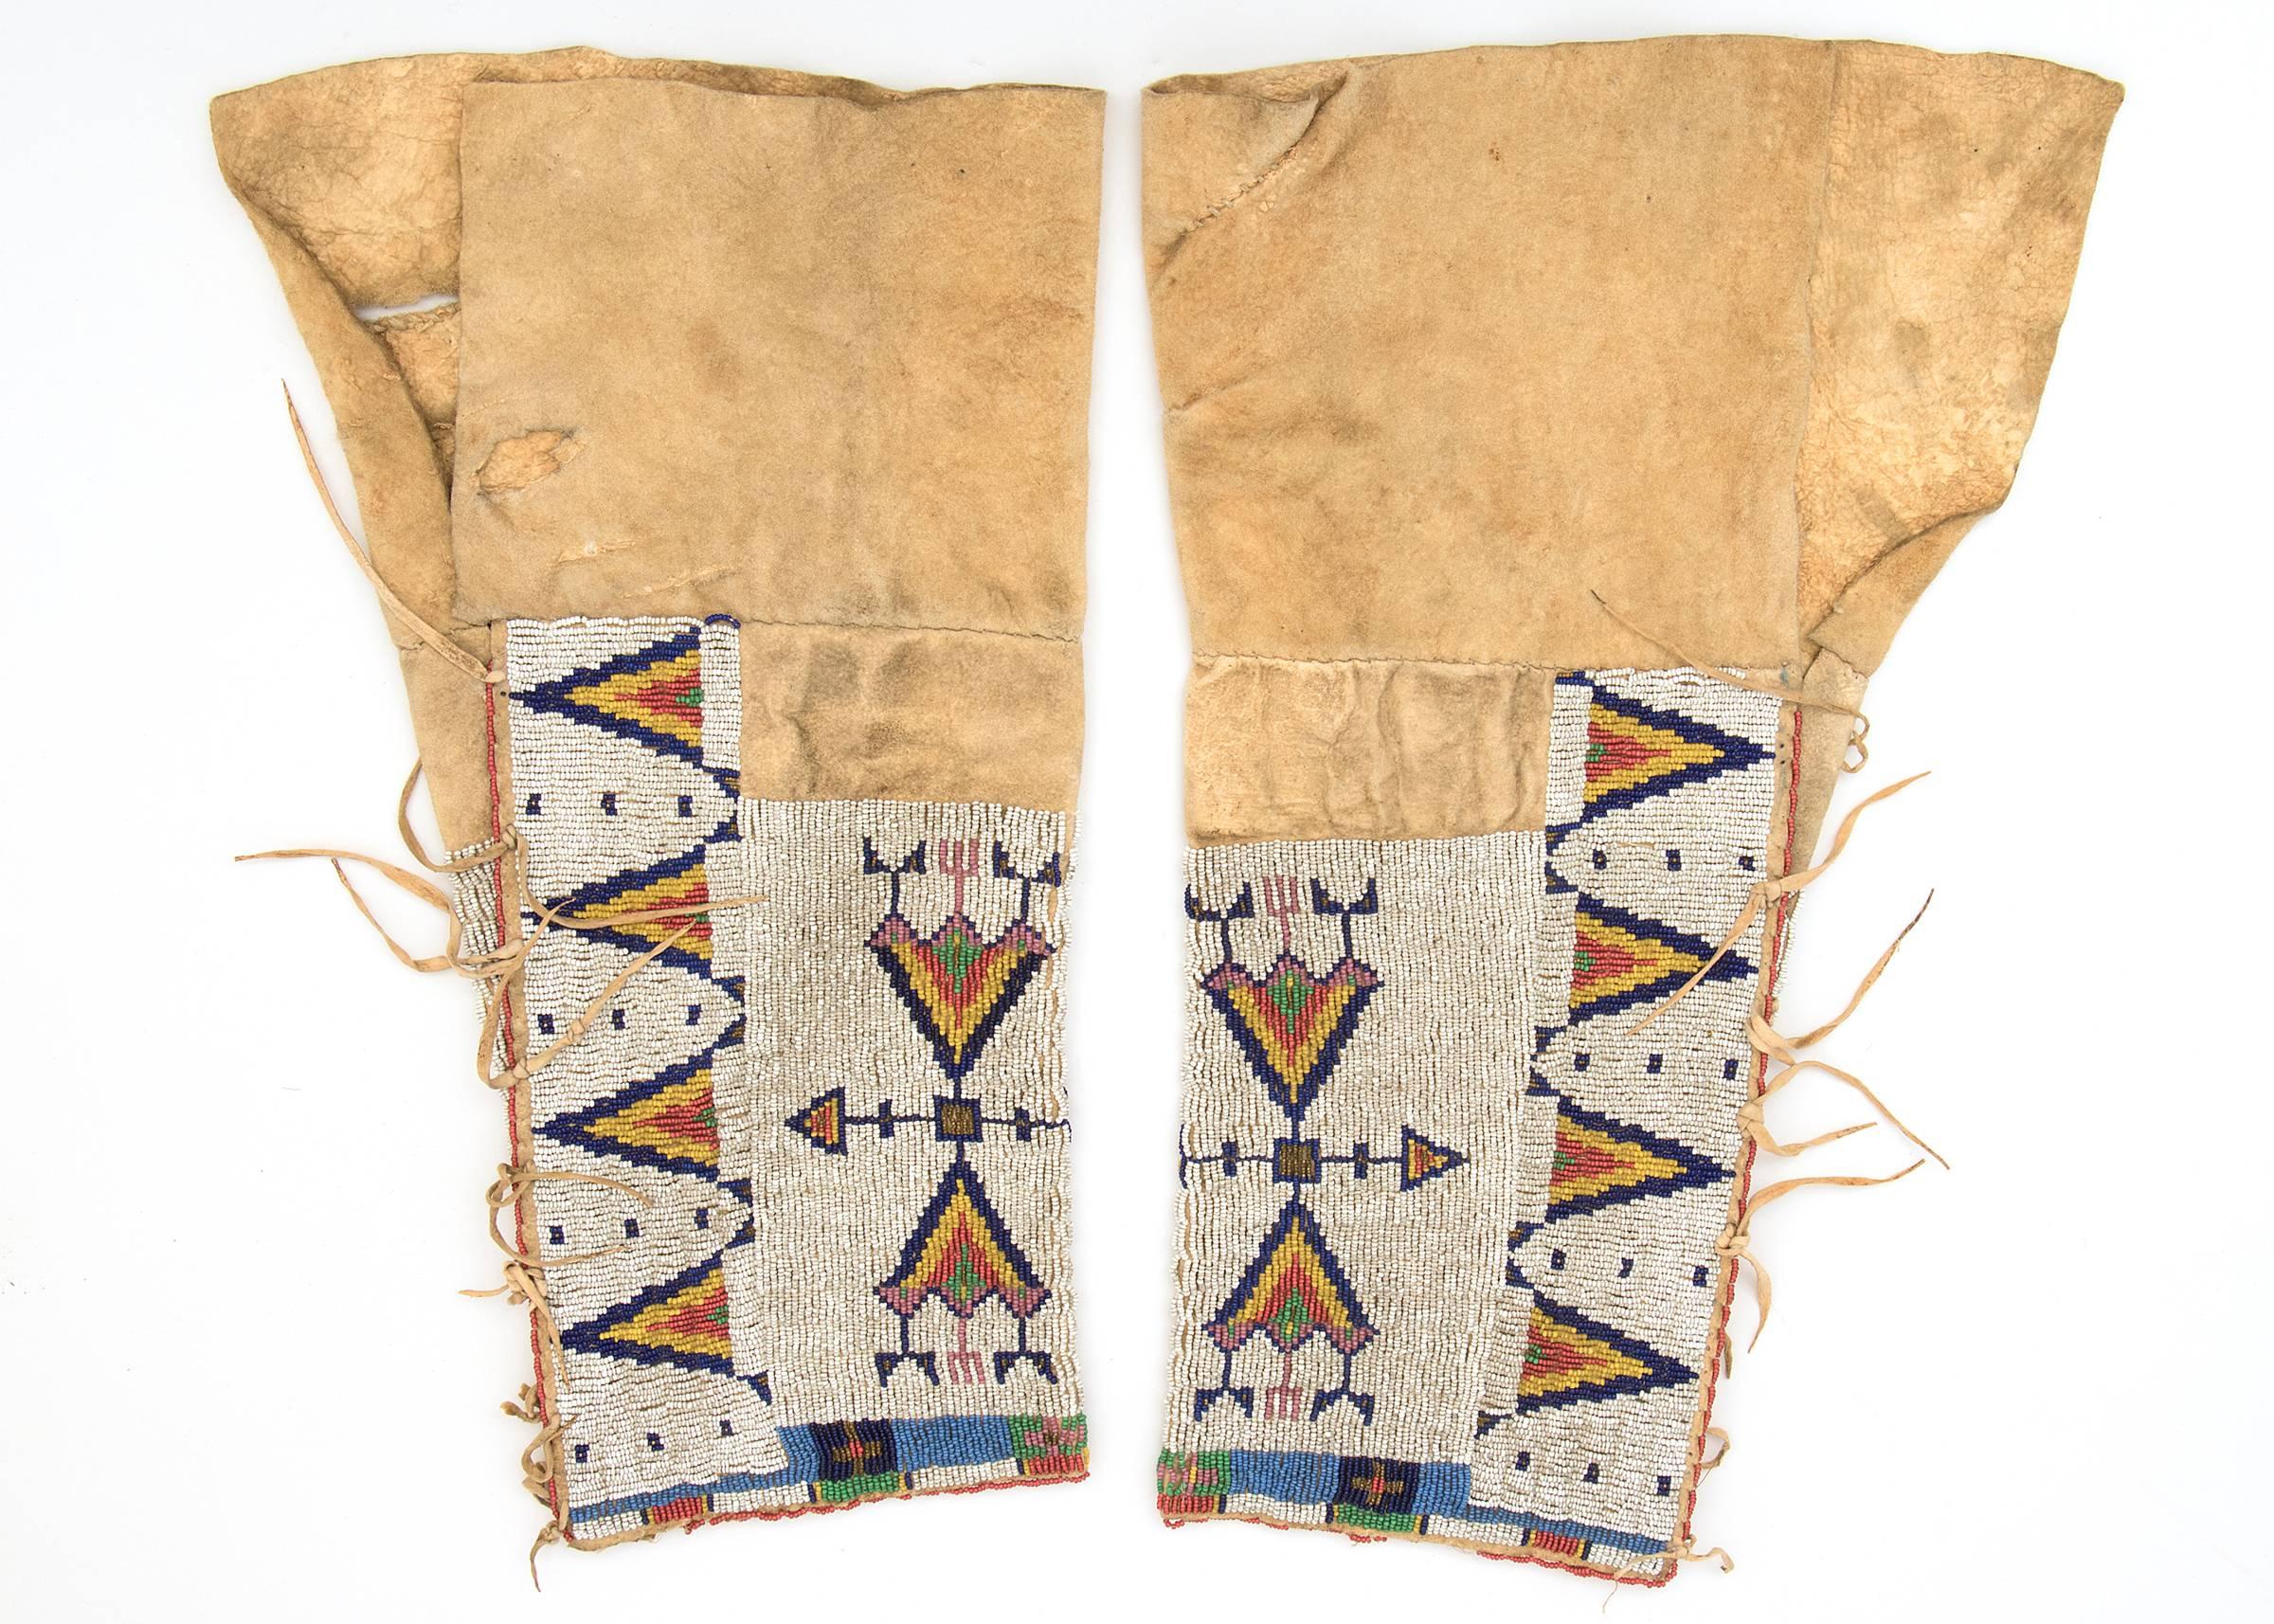 A pair of leggings constructed of native tanned hide decorated with trade beads. Design elements include stylized arrow and tepee/tipi motifs.

A Nomadic tribe, the Sioux are associated with areas of the great plains of the United States including